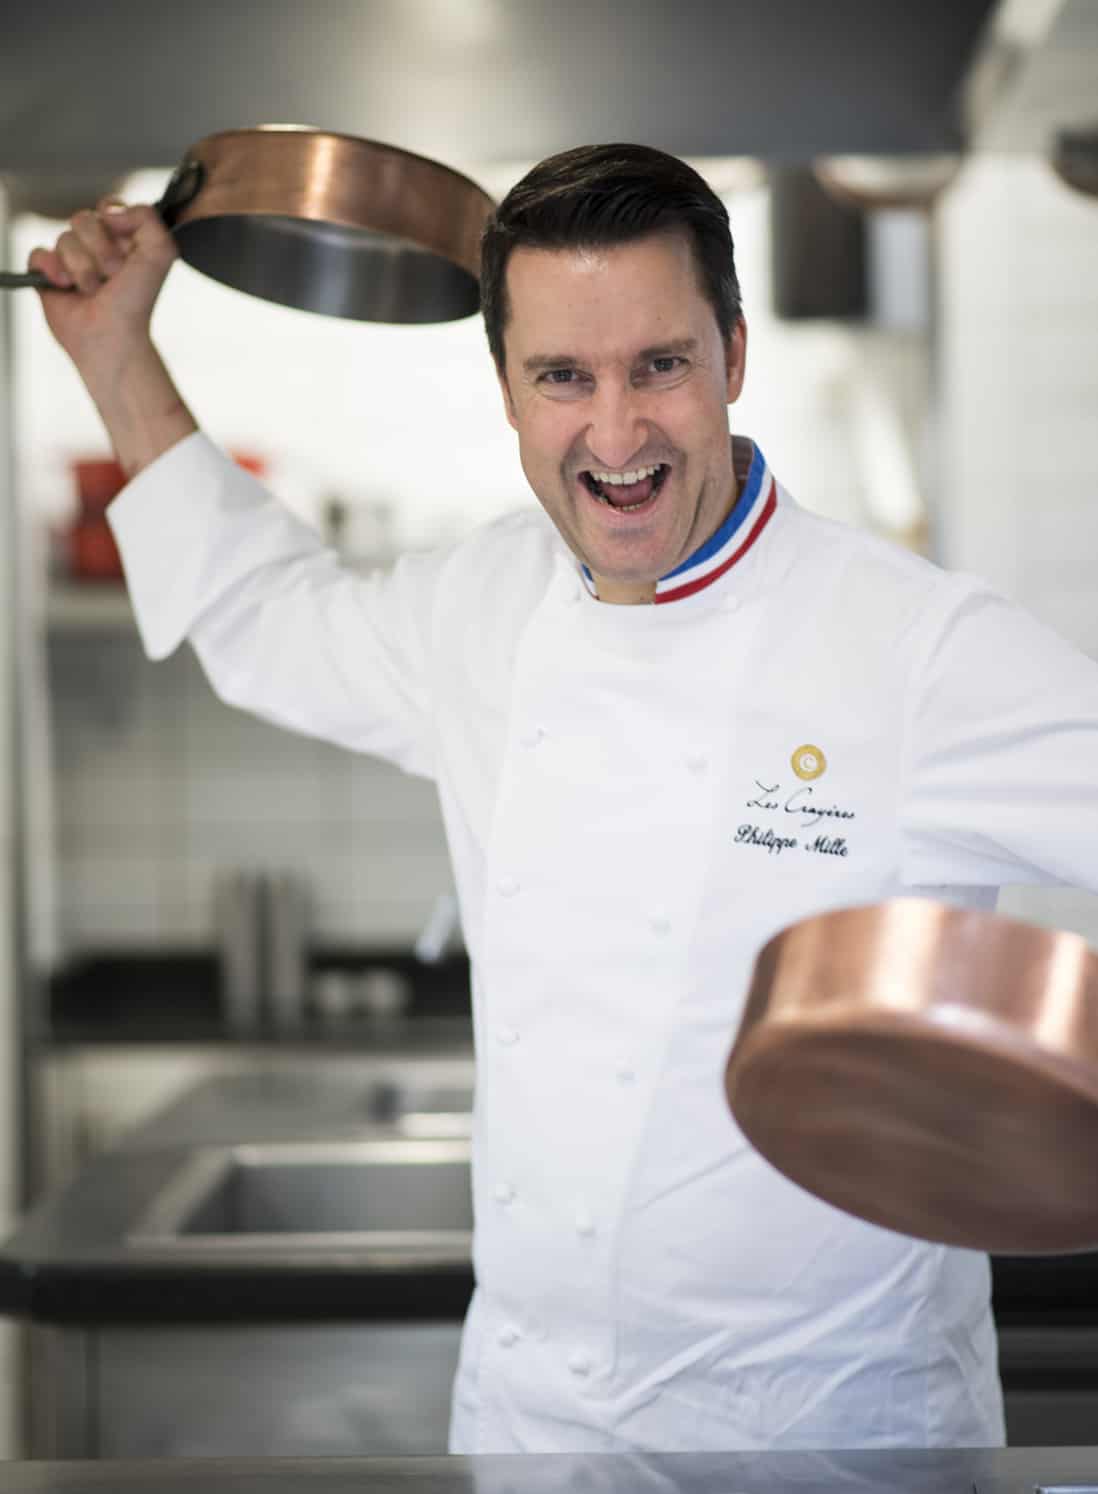 Chef Philippe Mille